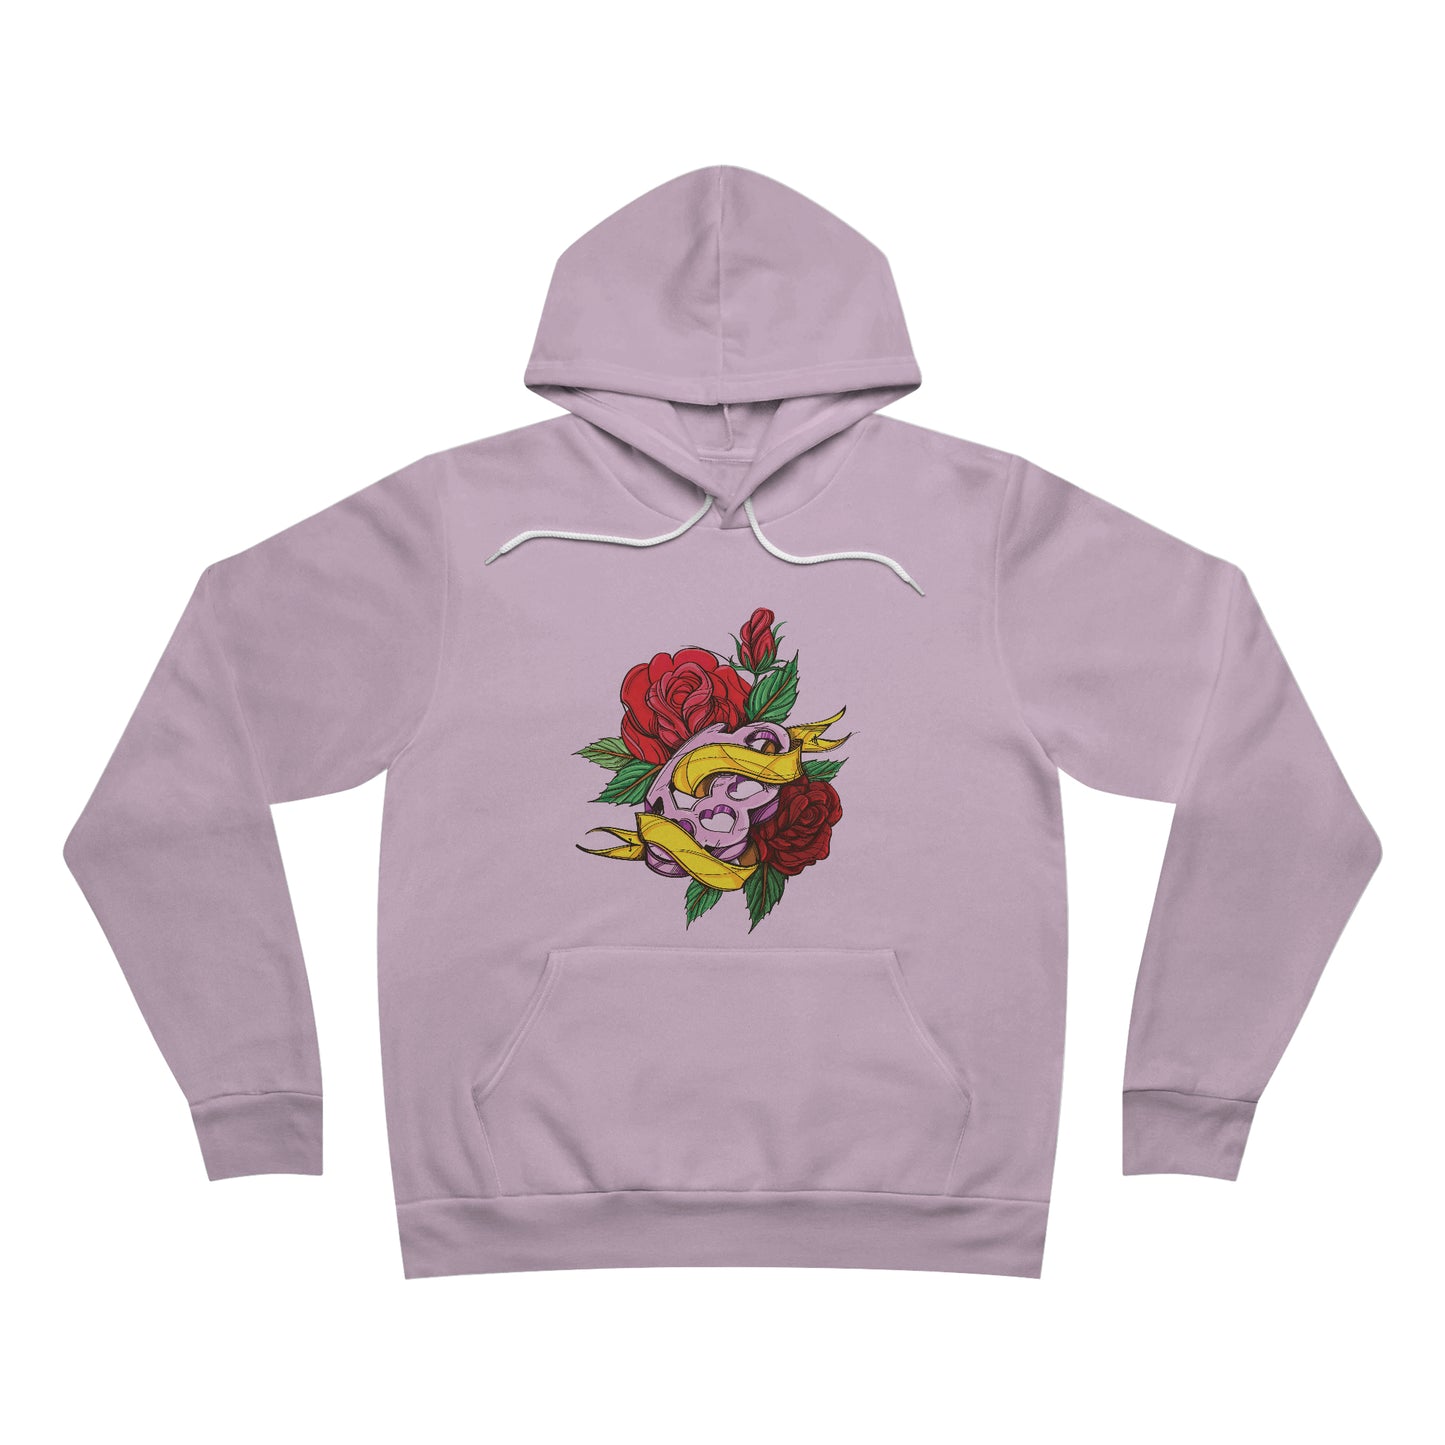 She's a Fighter Hoodie